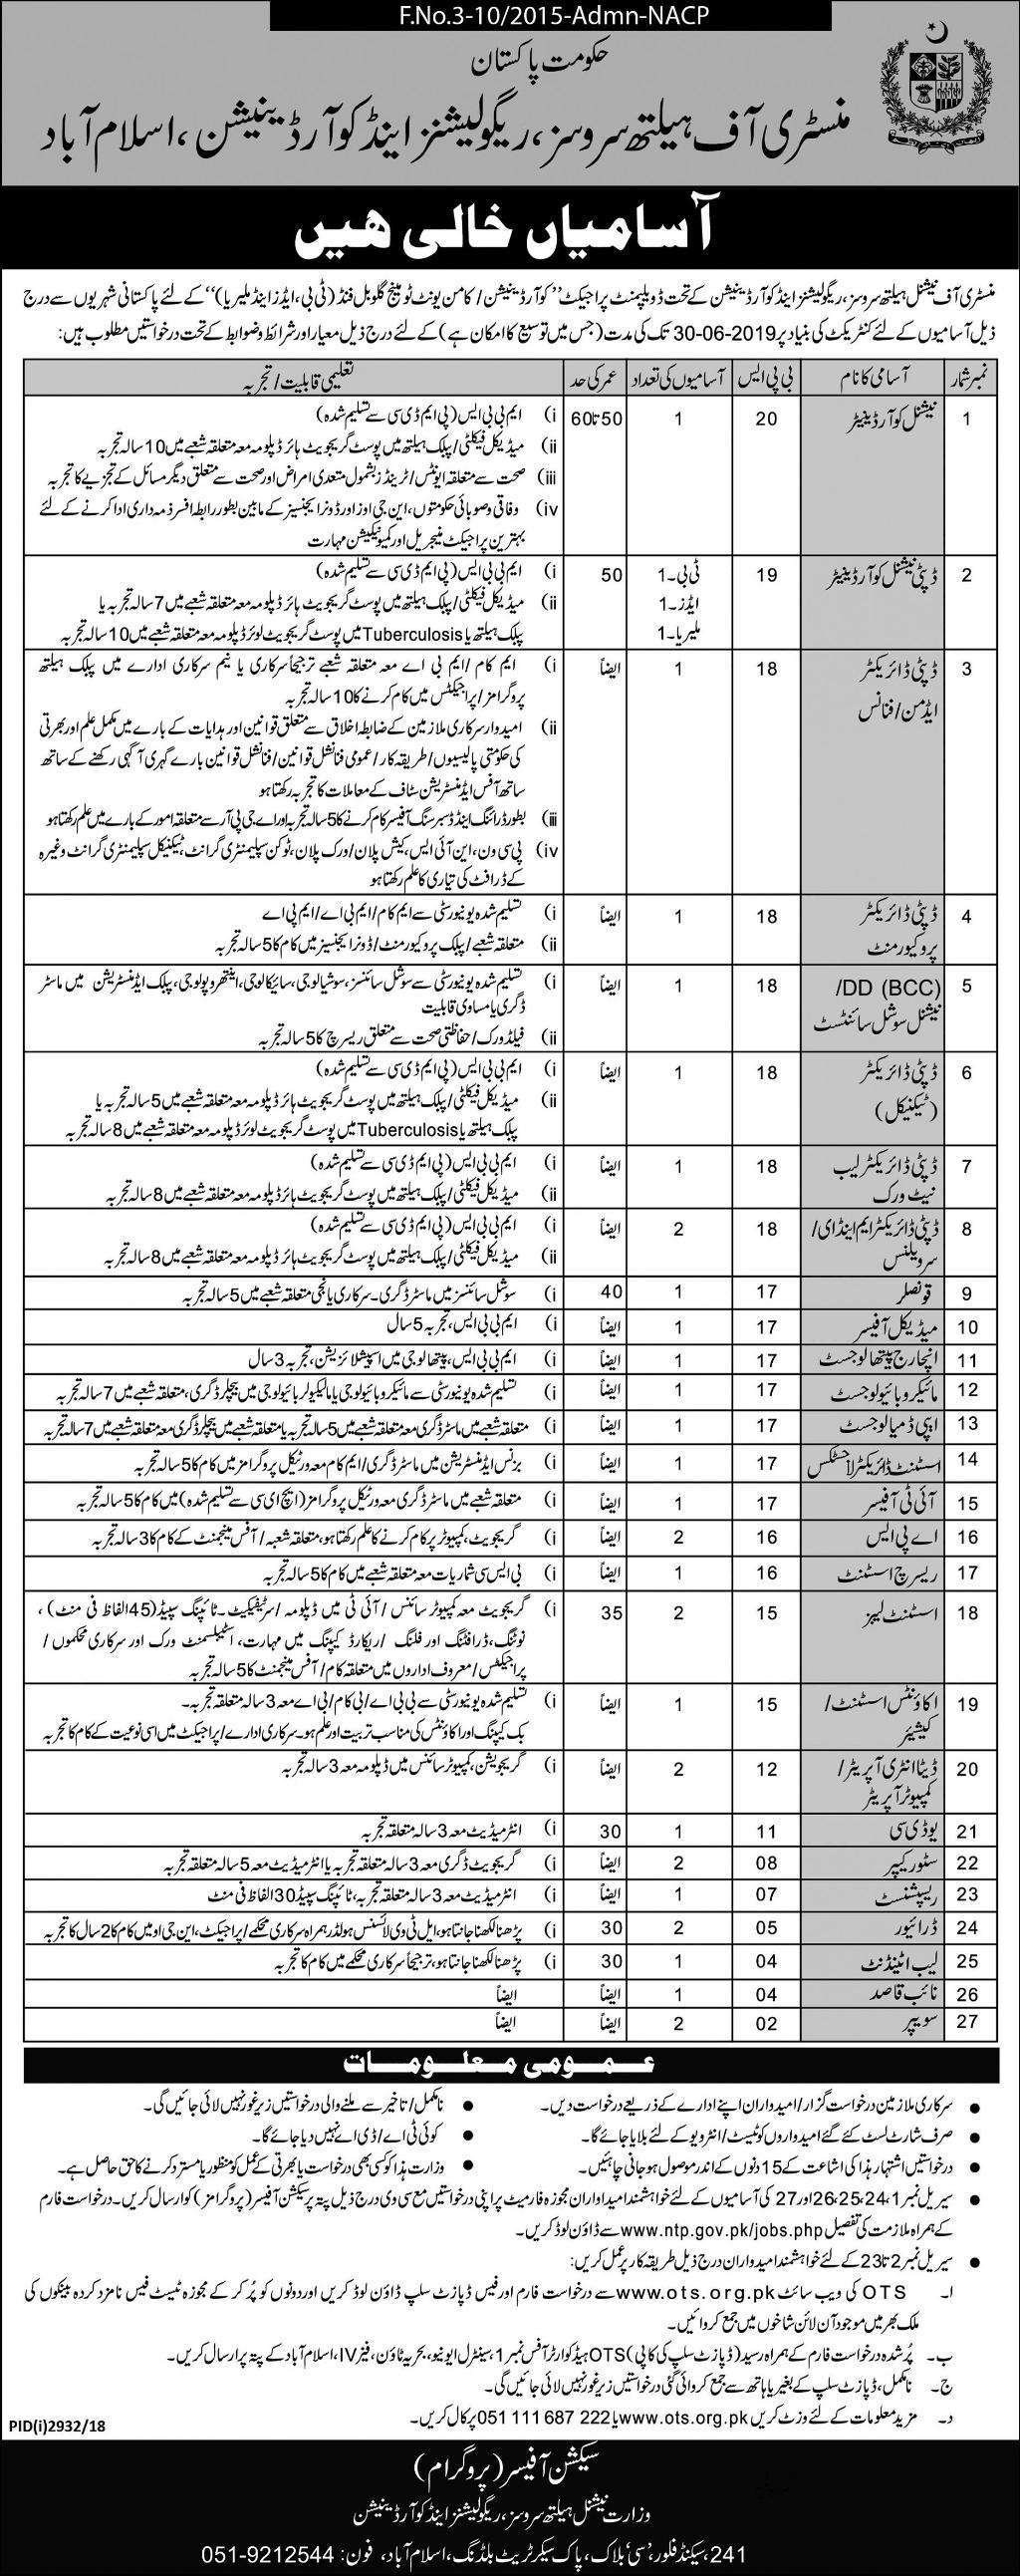 ministry of national health jobs 2019,latest jobs ministry of national health 2019,jobs in ministry of national health,ministry of national health,how to apply in ministry of national health,jobs in pakistan,government jobs,ministry of national food security & research pakistan jobs 2019,pakistan edification services pes jobs 2019,national health jobs,directorate of health services,pakistan jobs